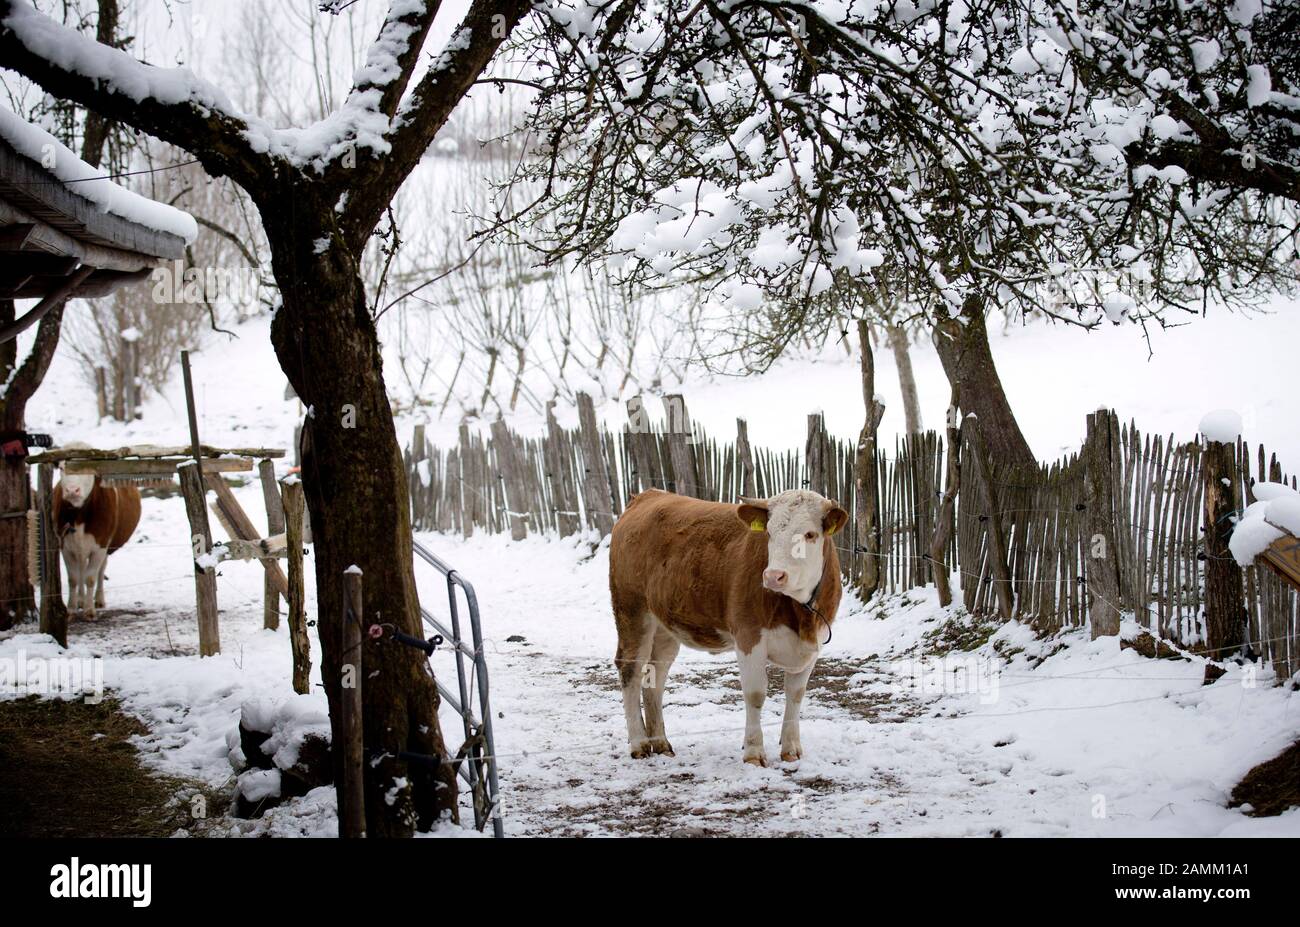 Page 3 - Cattle Farmer Snow High Stock Photography and Alamy